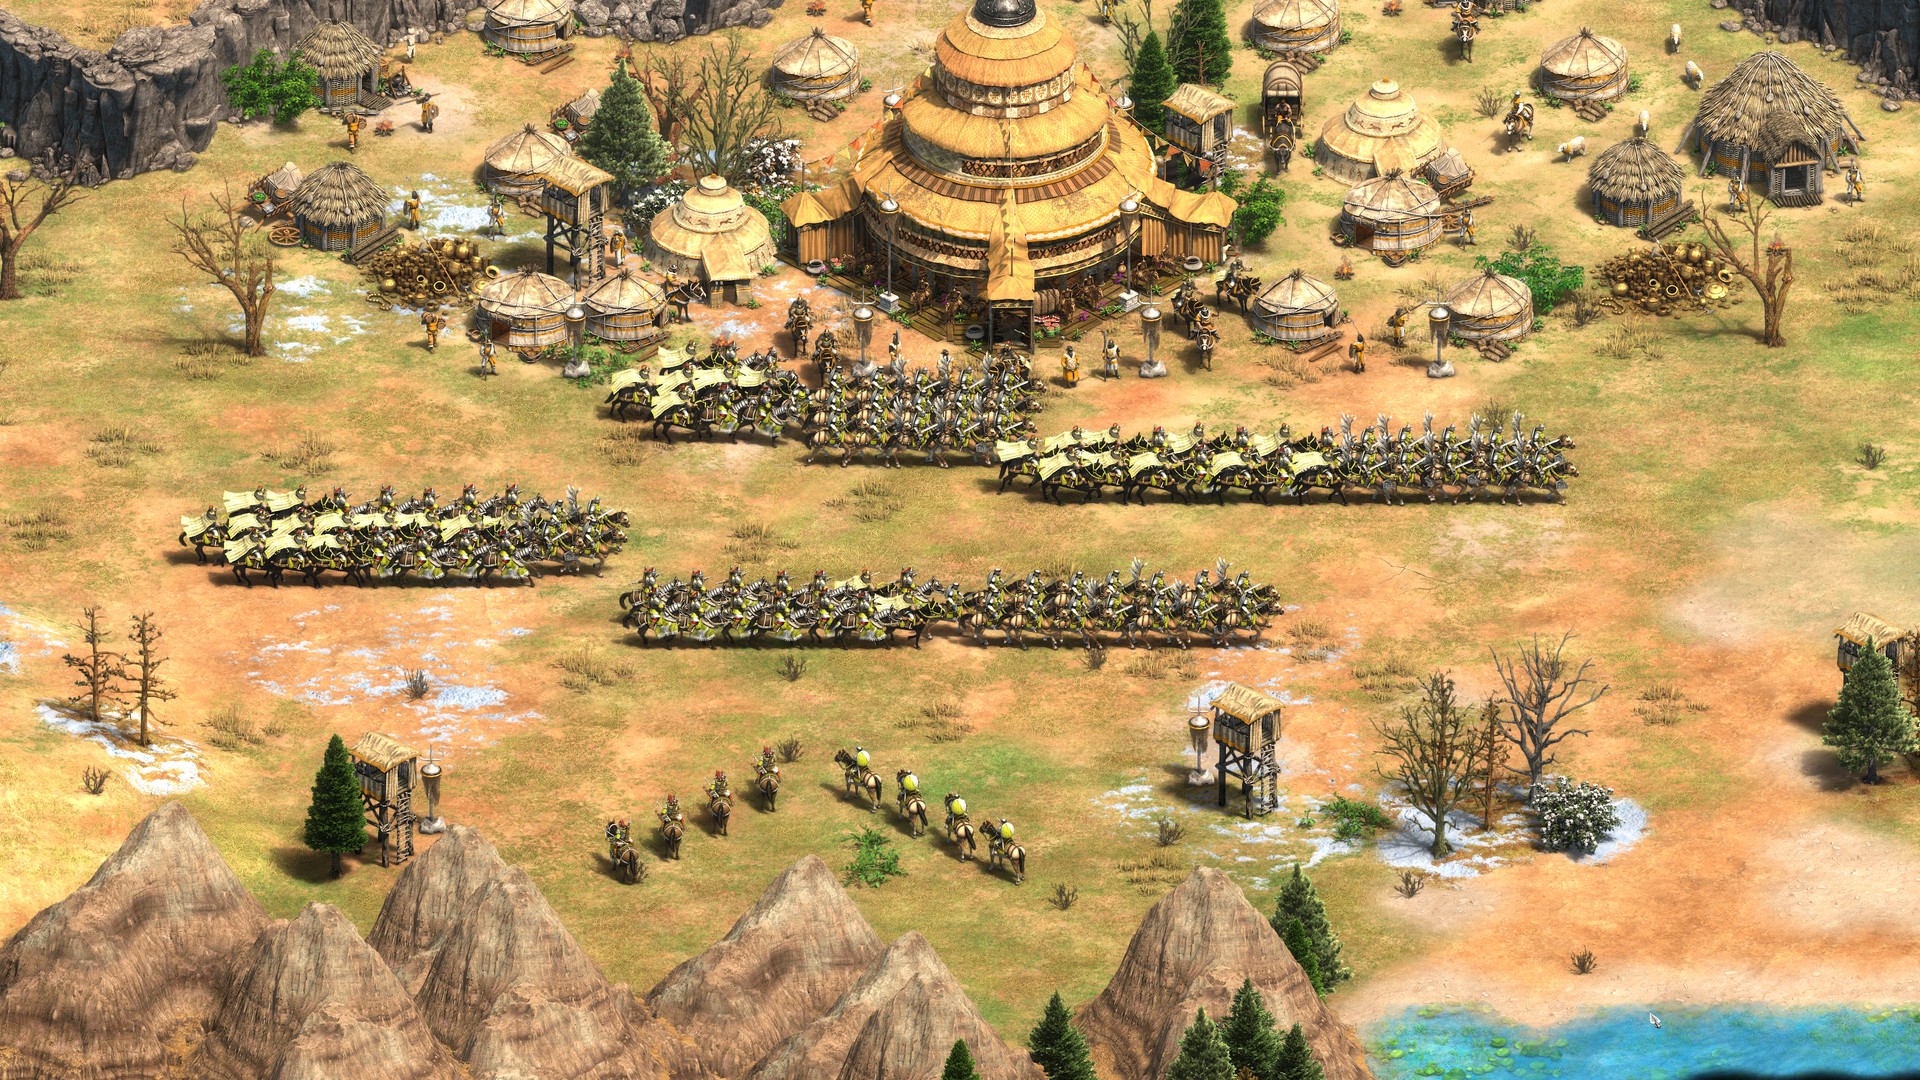 Age Of Empires Ii Definitive Edition - HD Wallpaper 